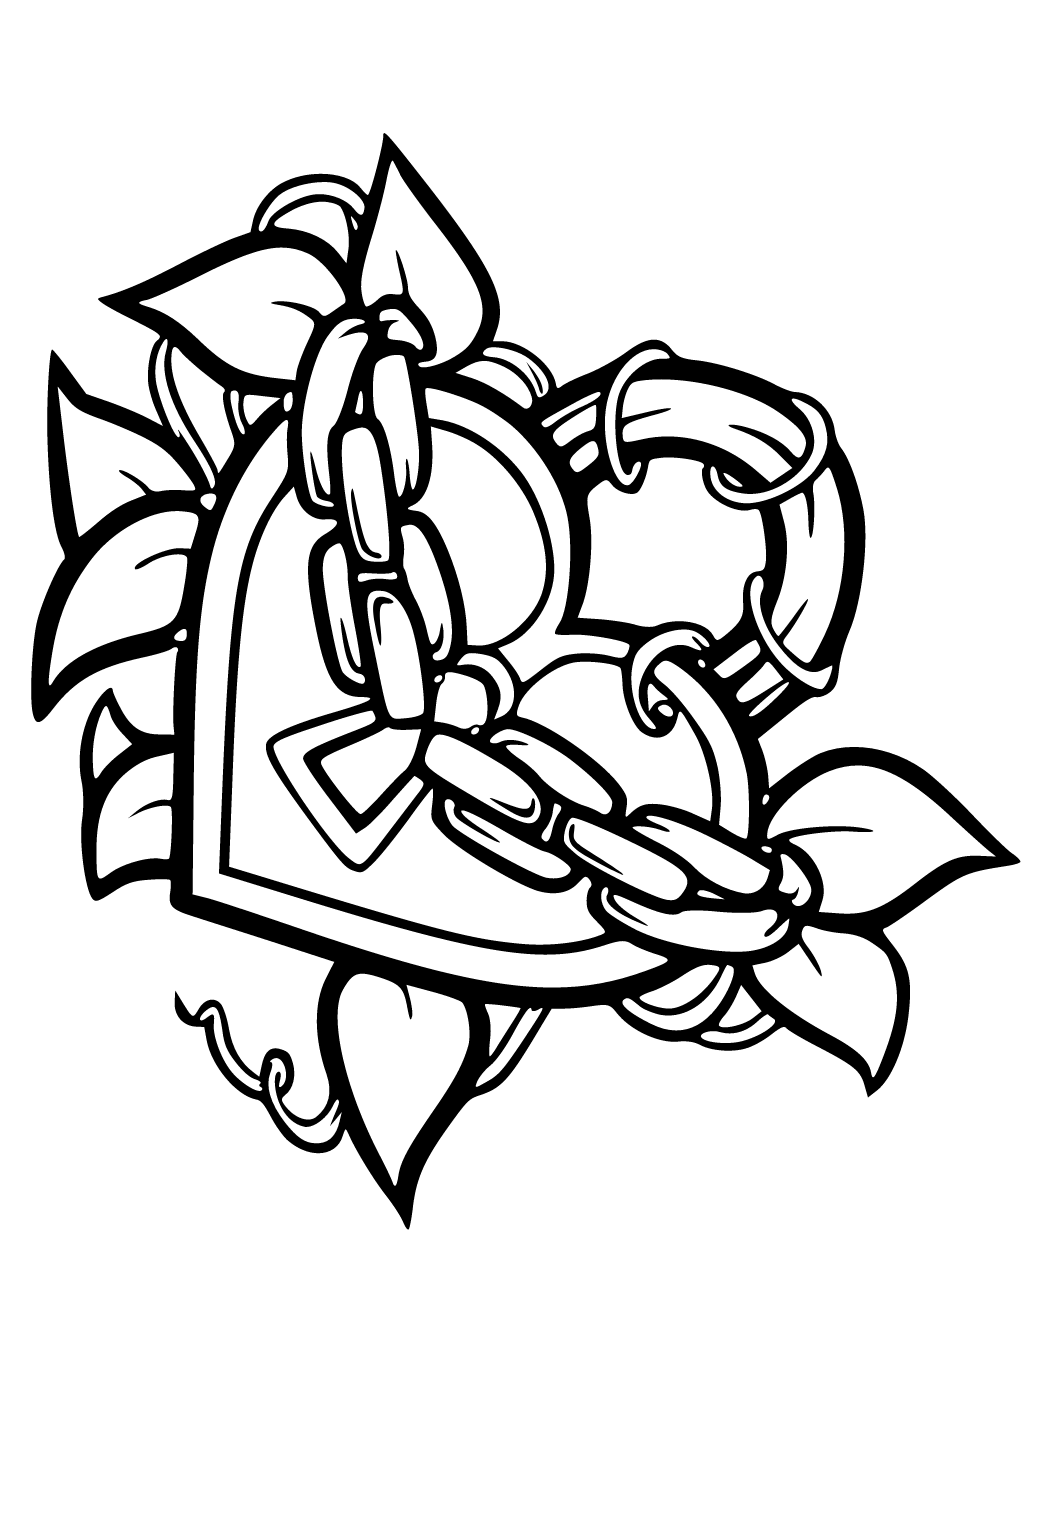 Free printable graffiti heart coloring page for adults and kids